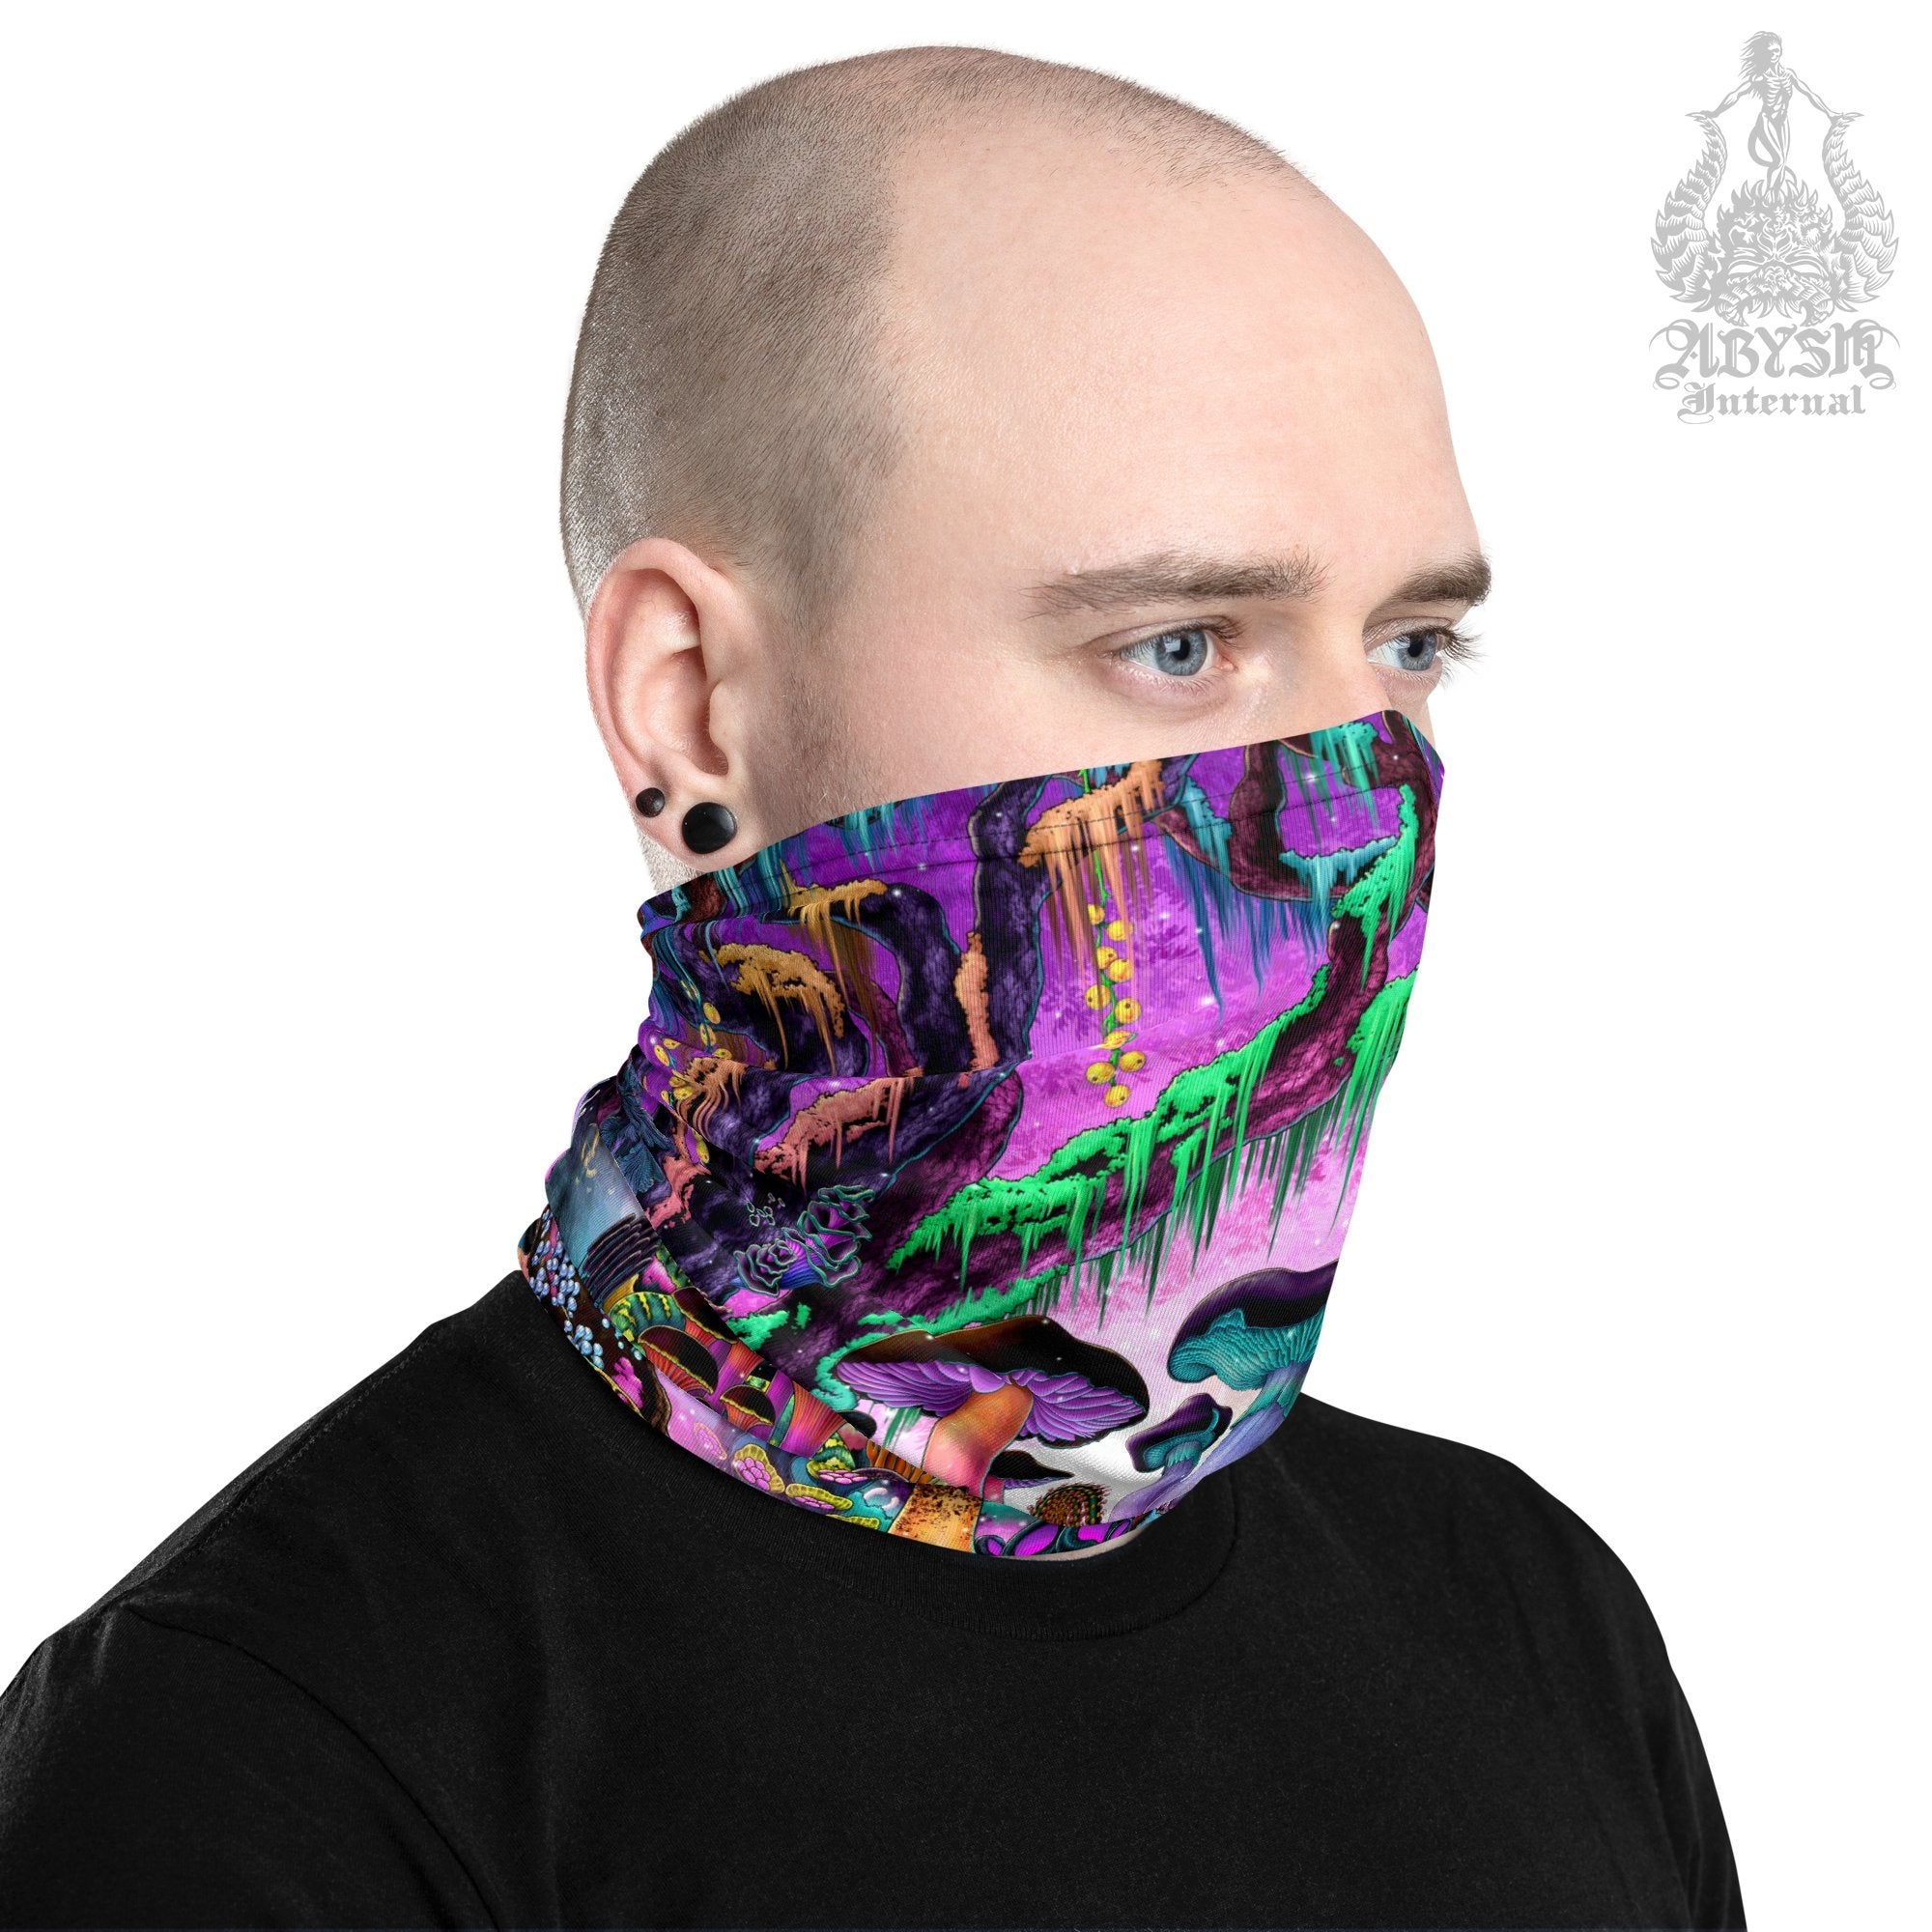 Mushrooms Neck Gaiter, Magic Shrooms Face Mask, Pastel Head Covering, Psychedelic Festival Outfit - Black - Abysm Internal